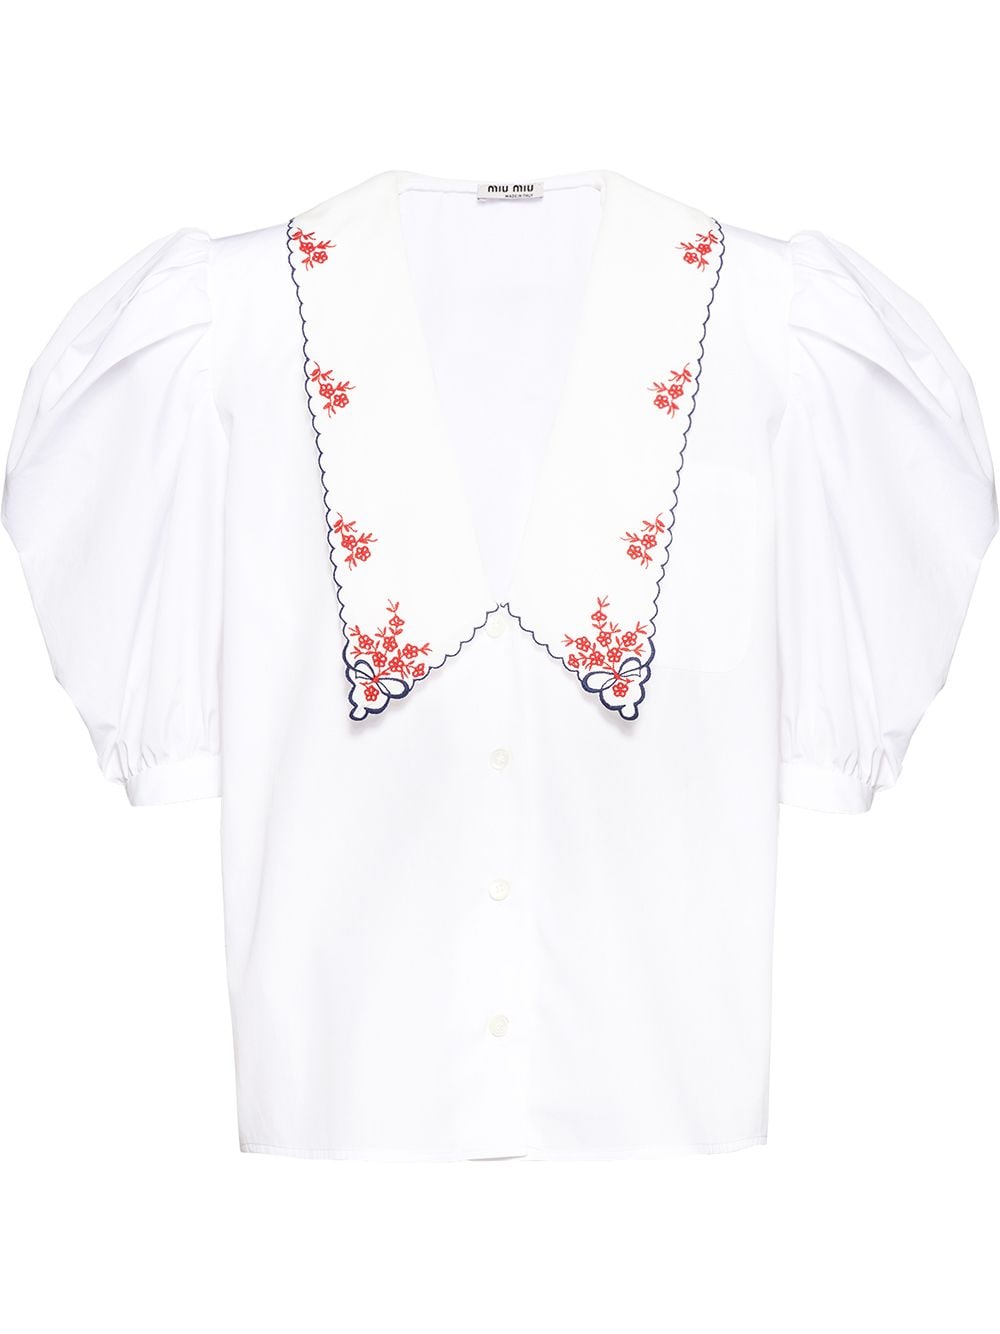 Miu Miu embroidered pointed collar blouse